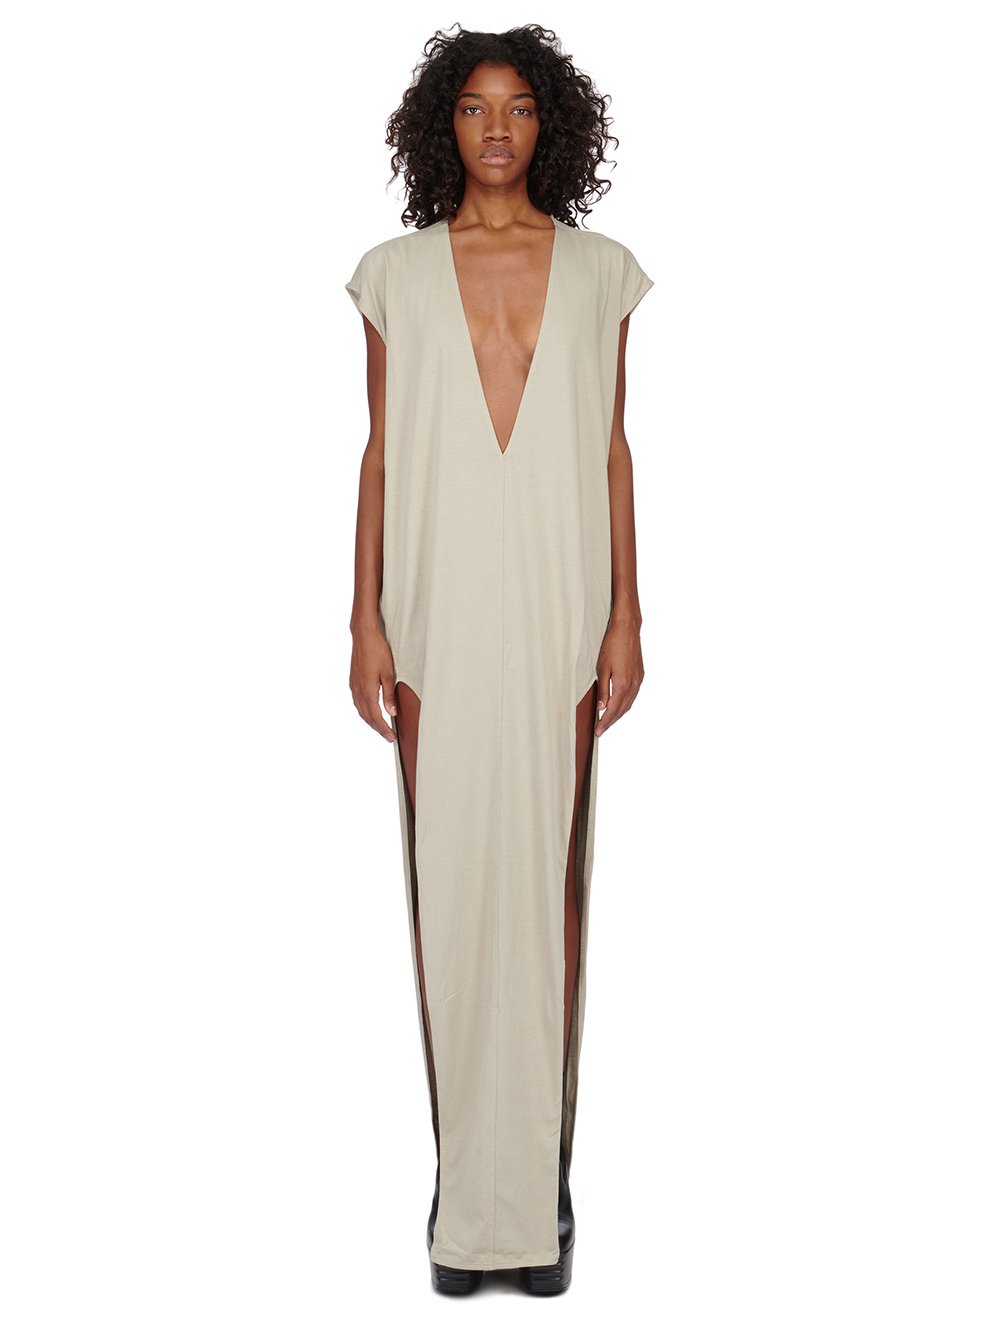 RICK OWENS FW23 LUXOR ARROWHEAD GOWN IN PEARL CLASSIC COTTON JERSEY